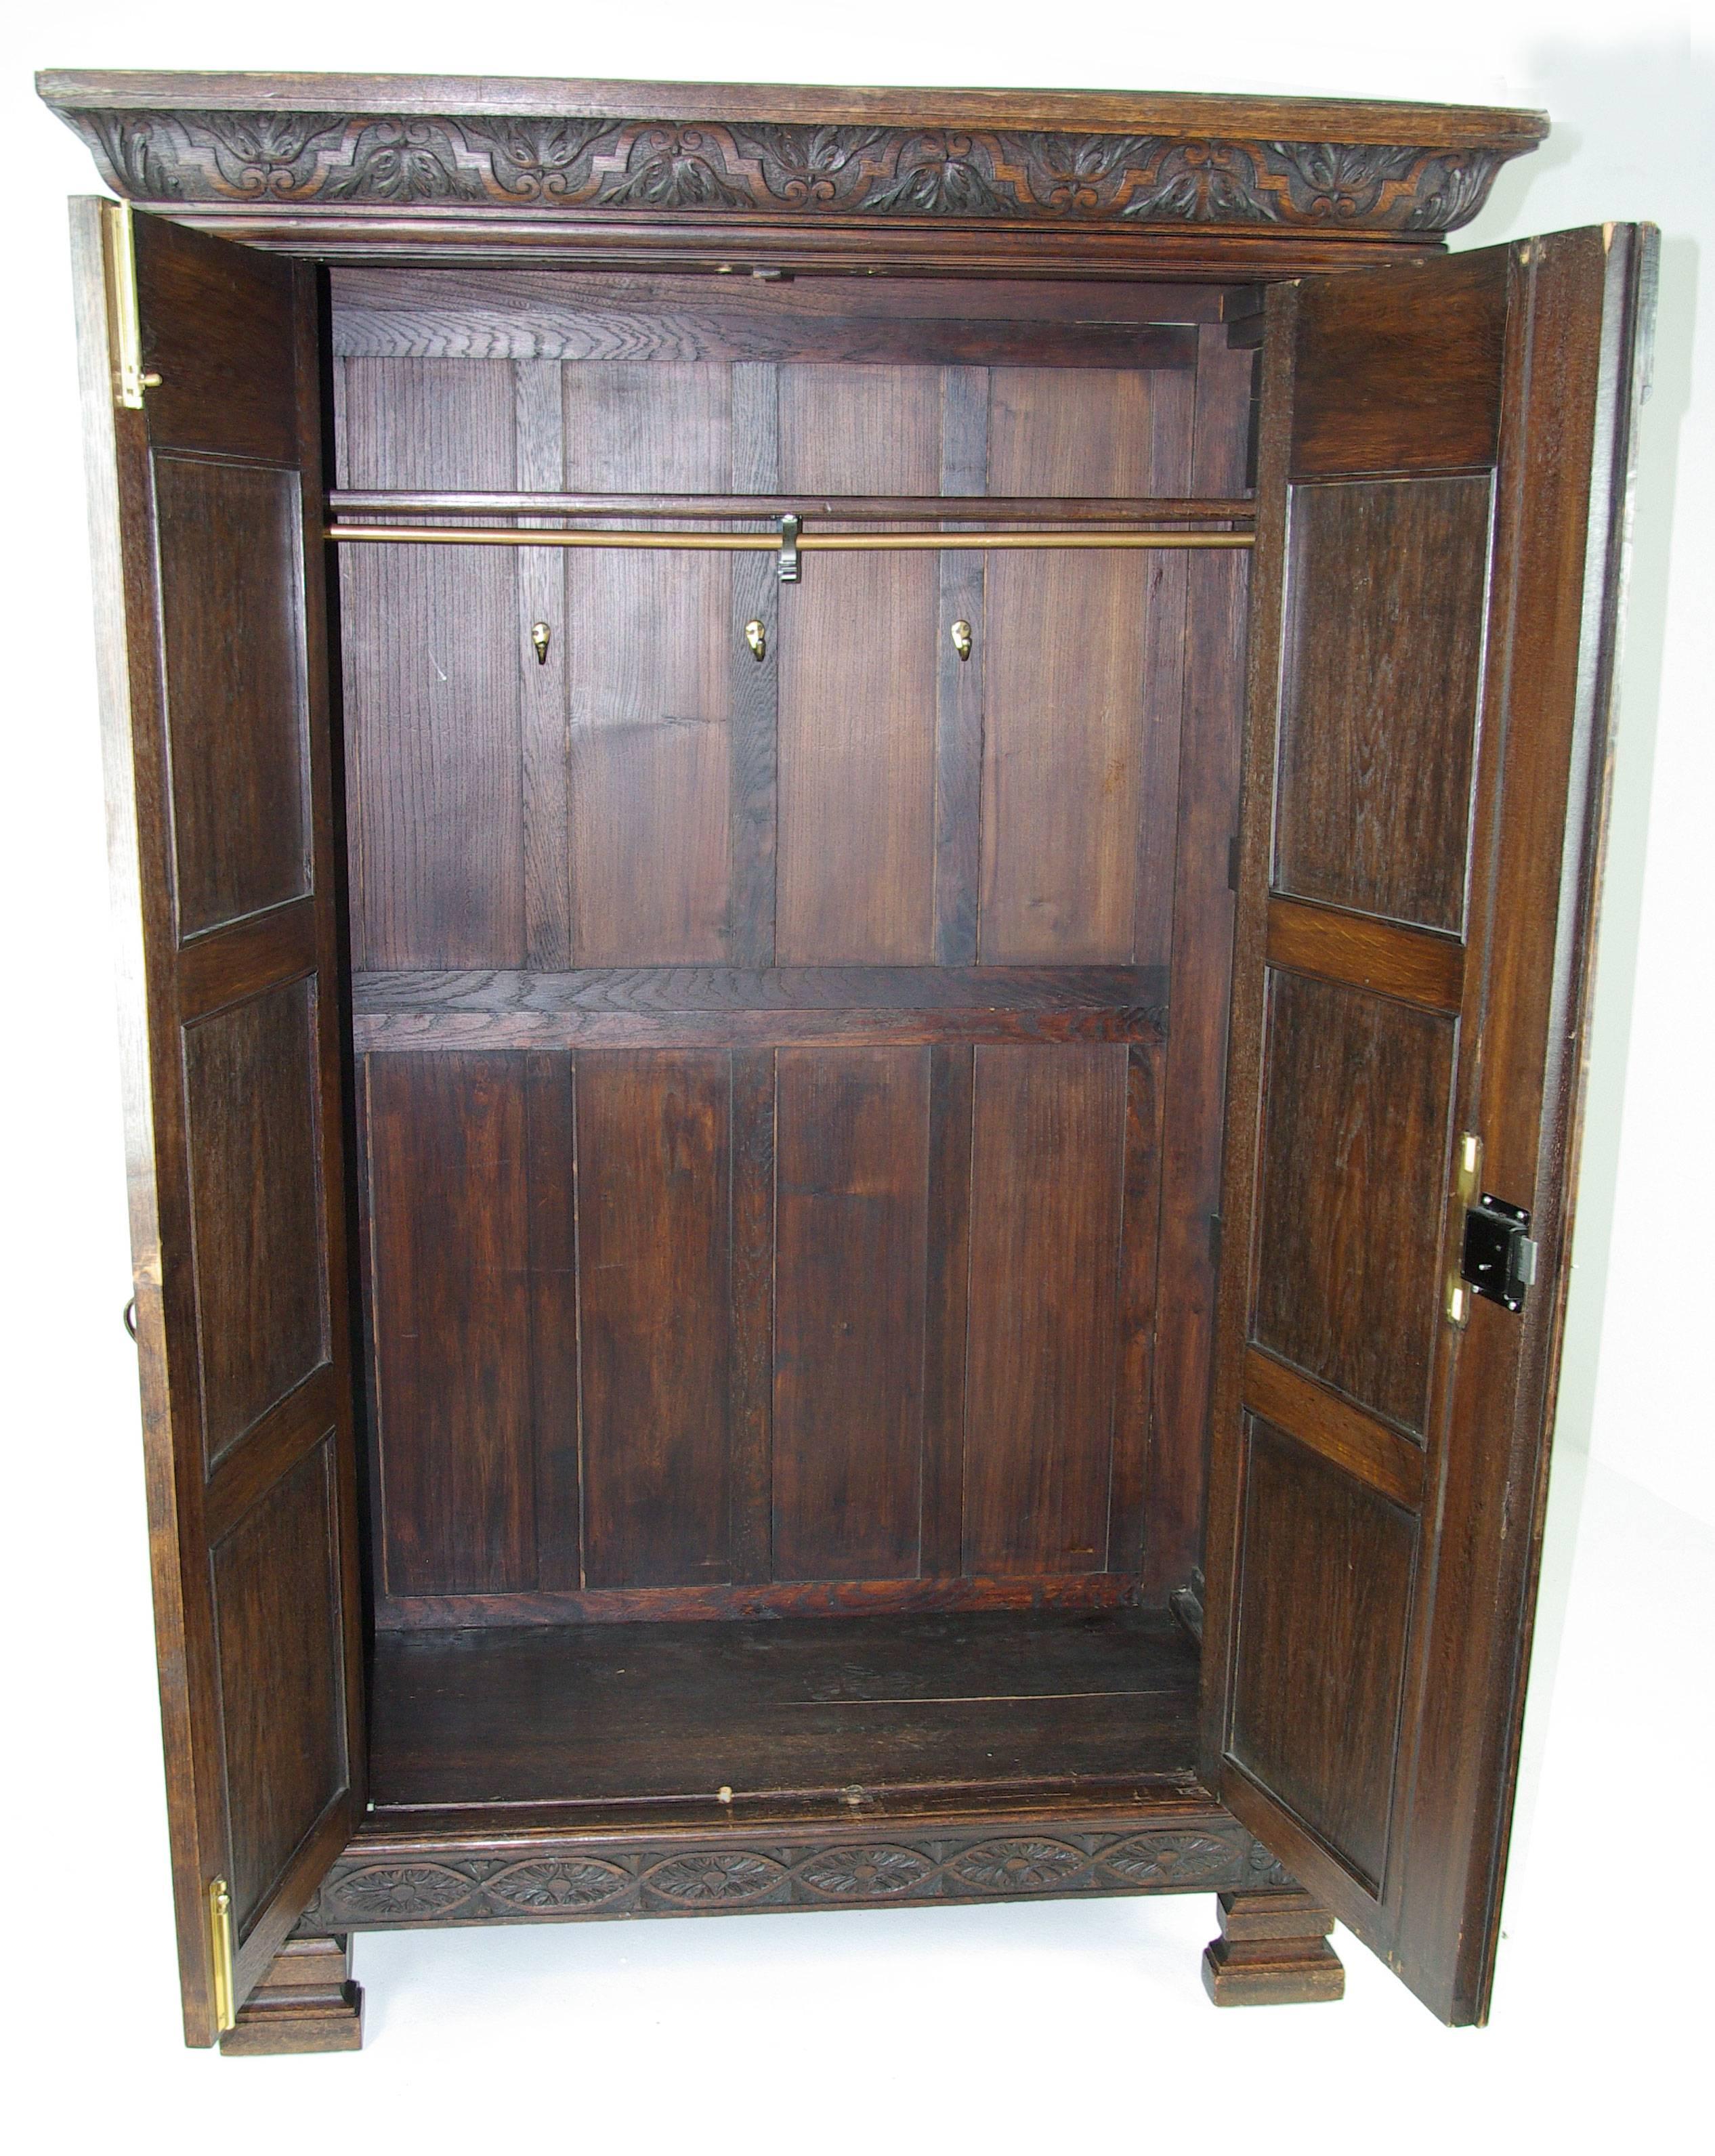 Hand-Crafted Antique Scottish Heavily Carved Oak Armoire, Wardrobe, Closet